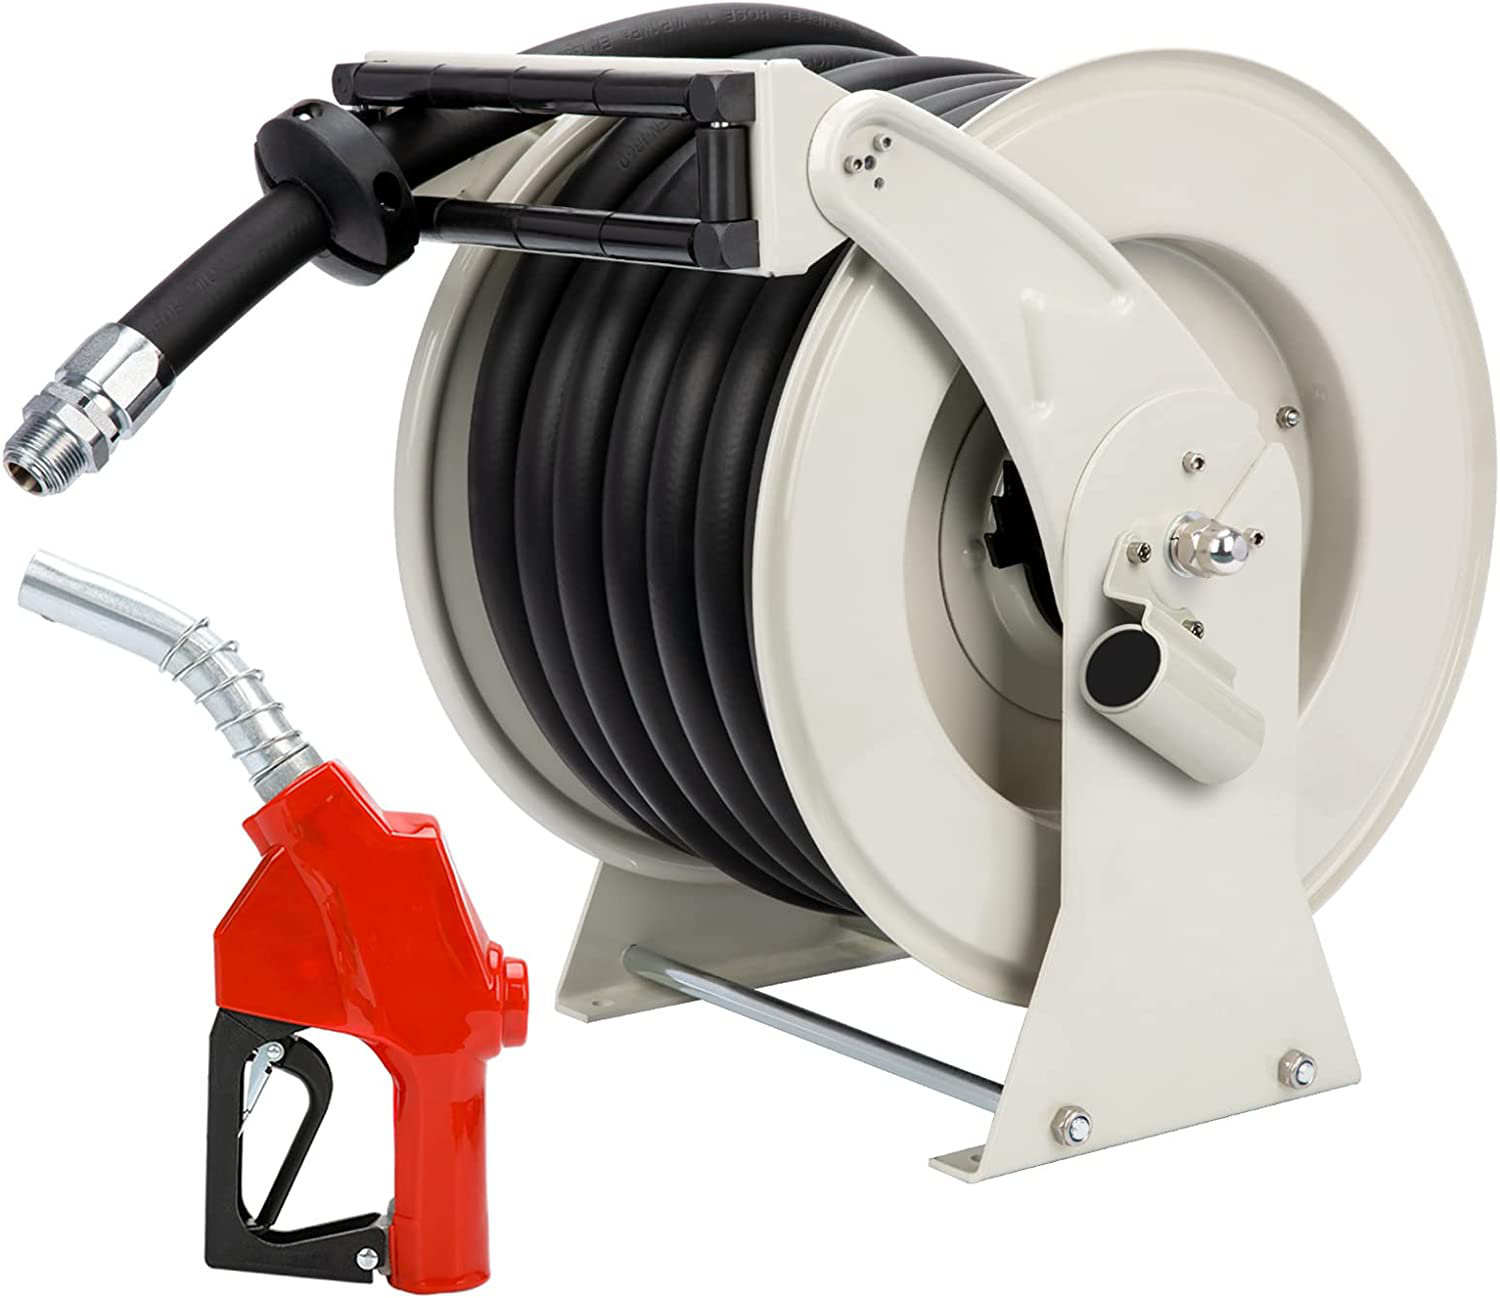 Domccy Steel Stand Hose Reel Finish: Silver